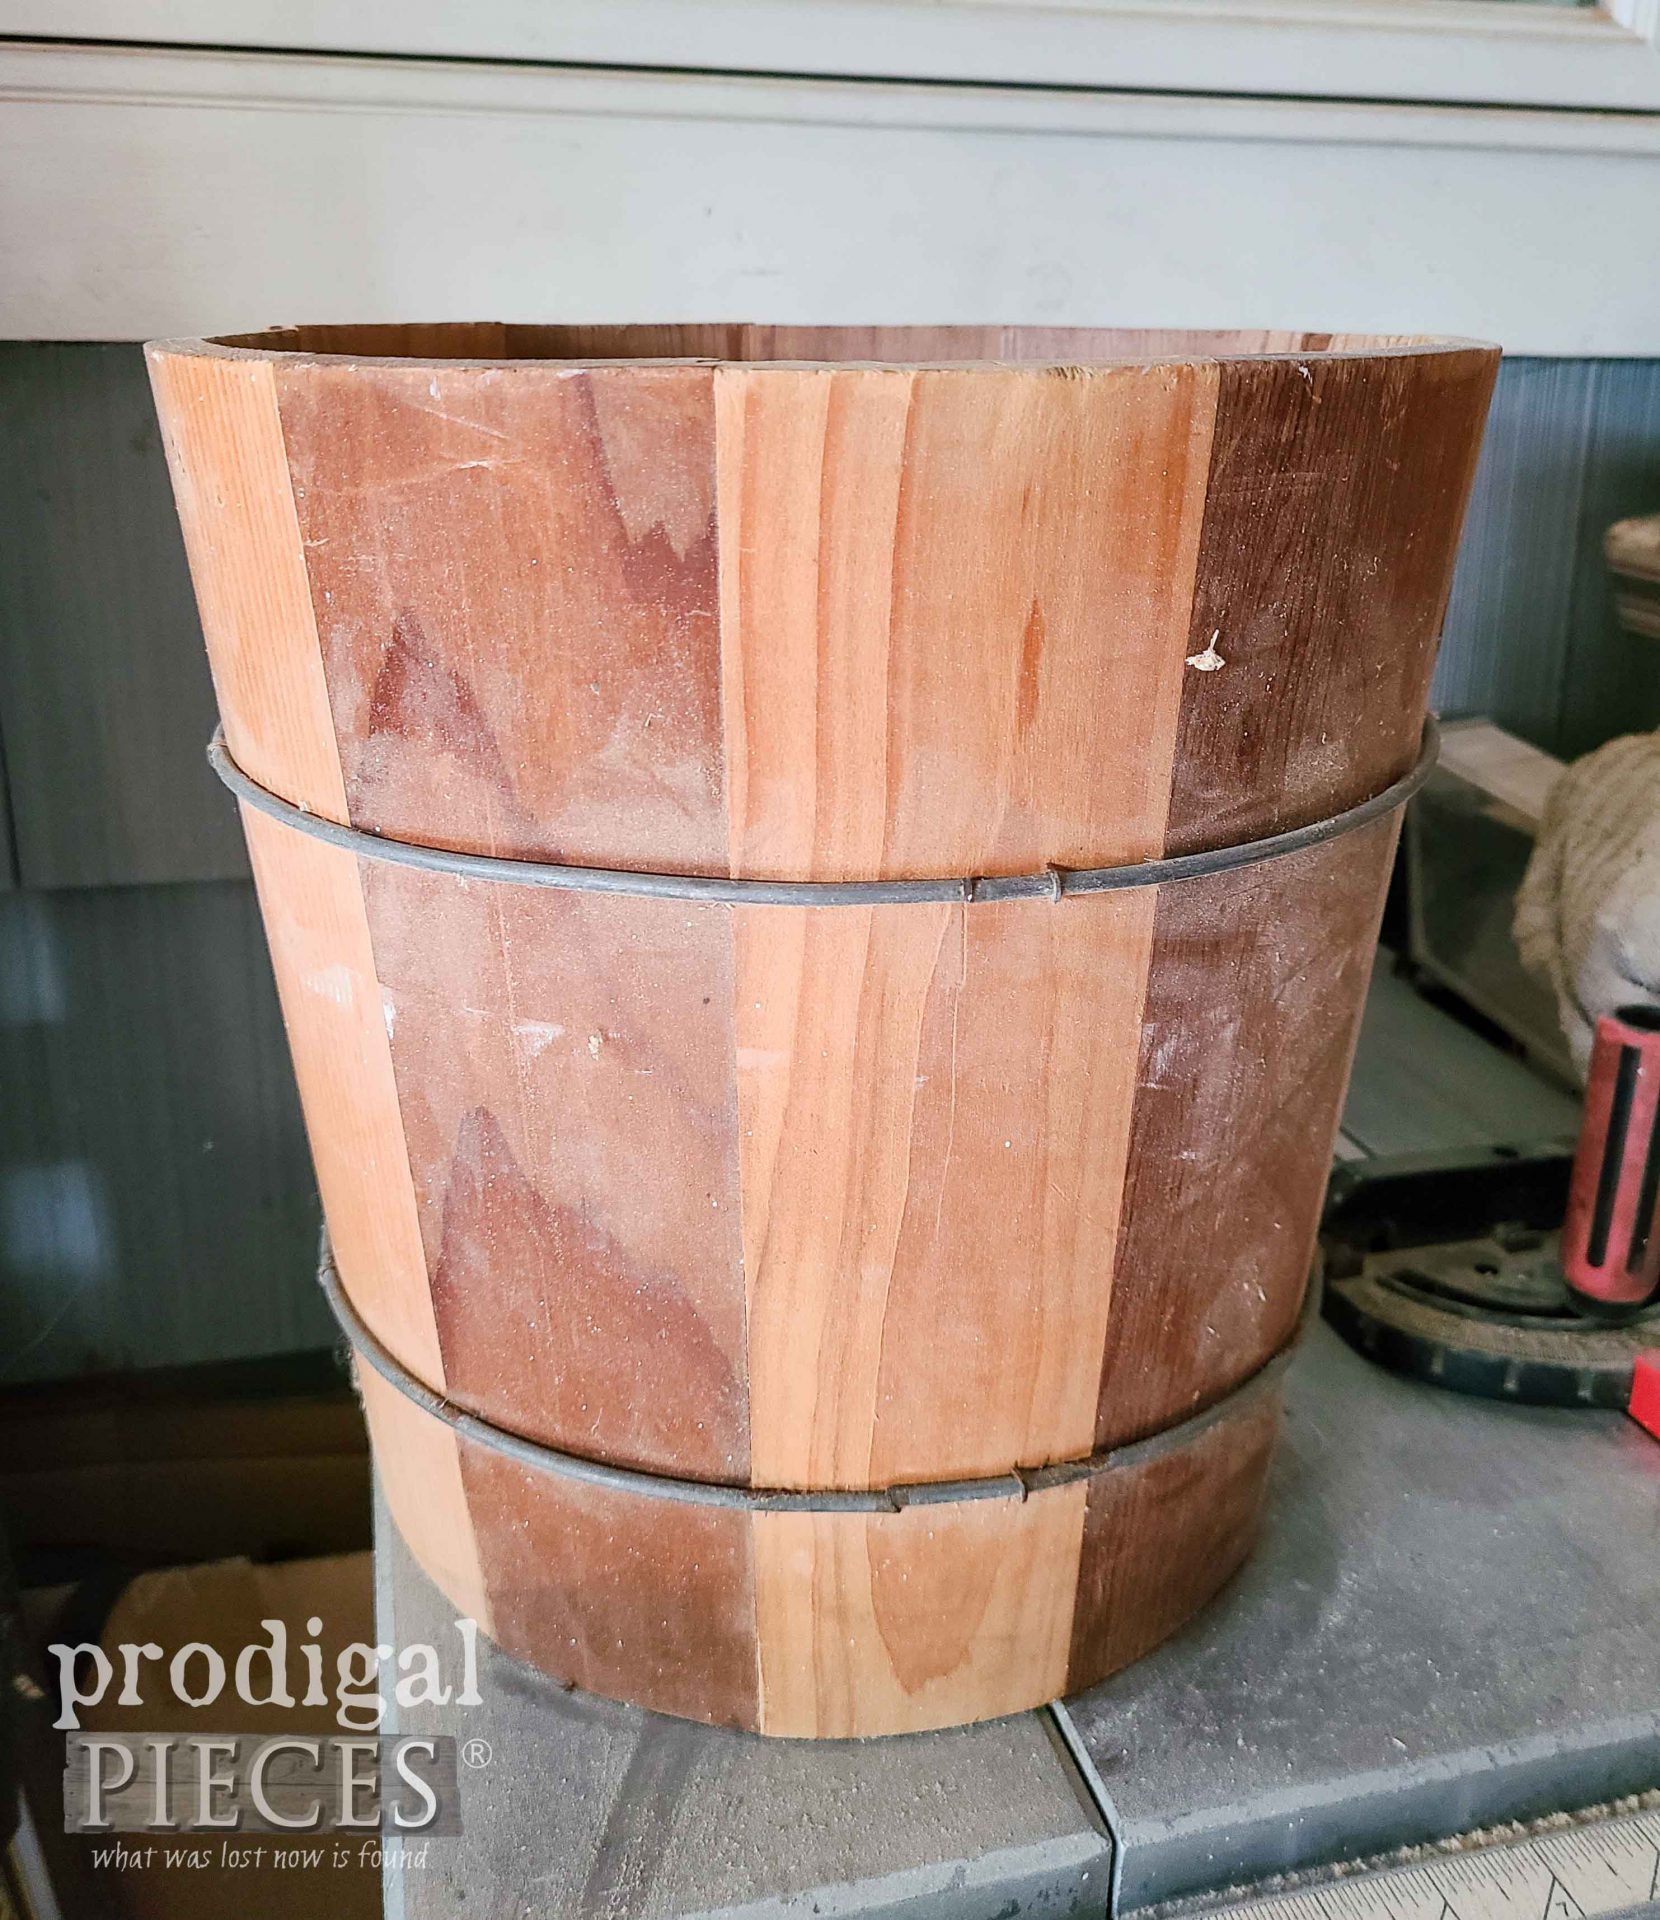 Vintage Ice Cream Bucket Before Makeover by Larissa of Prodigal Pieces | prodigalpieces.com #prodigalpieces